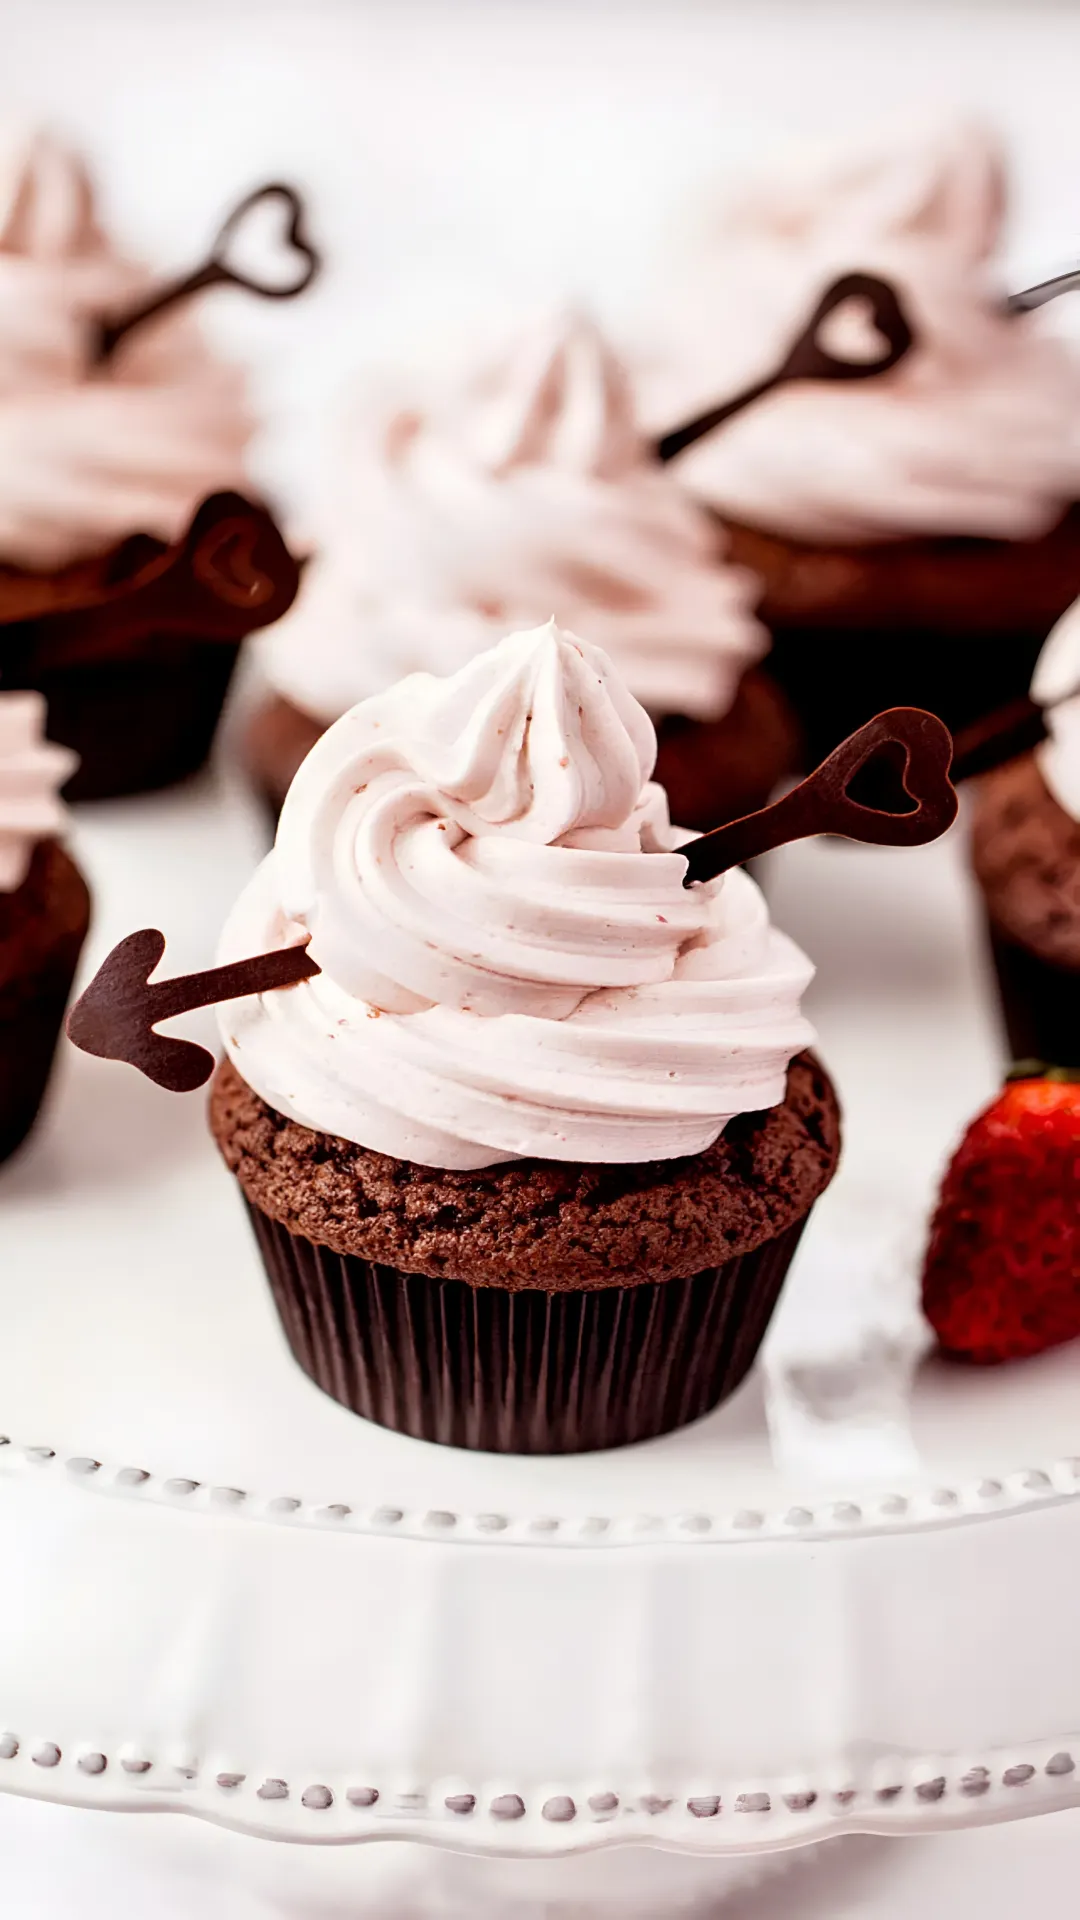 thumb for Cupid Brownie Cake Wallpaper